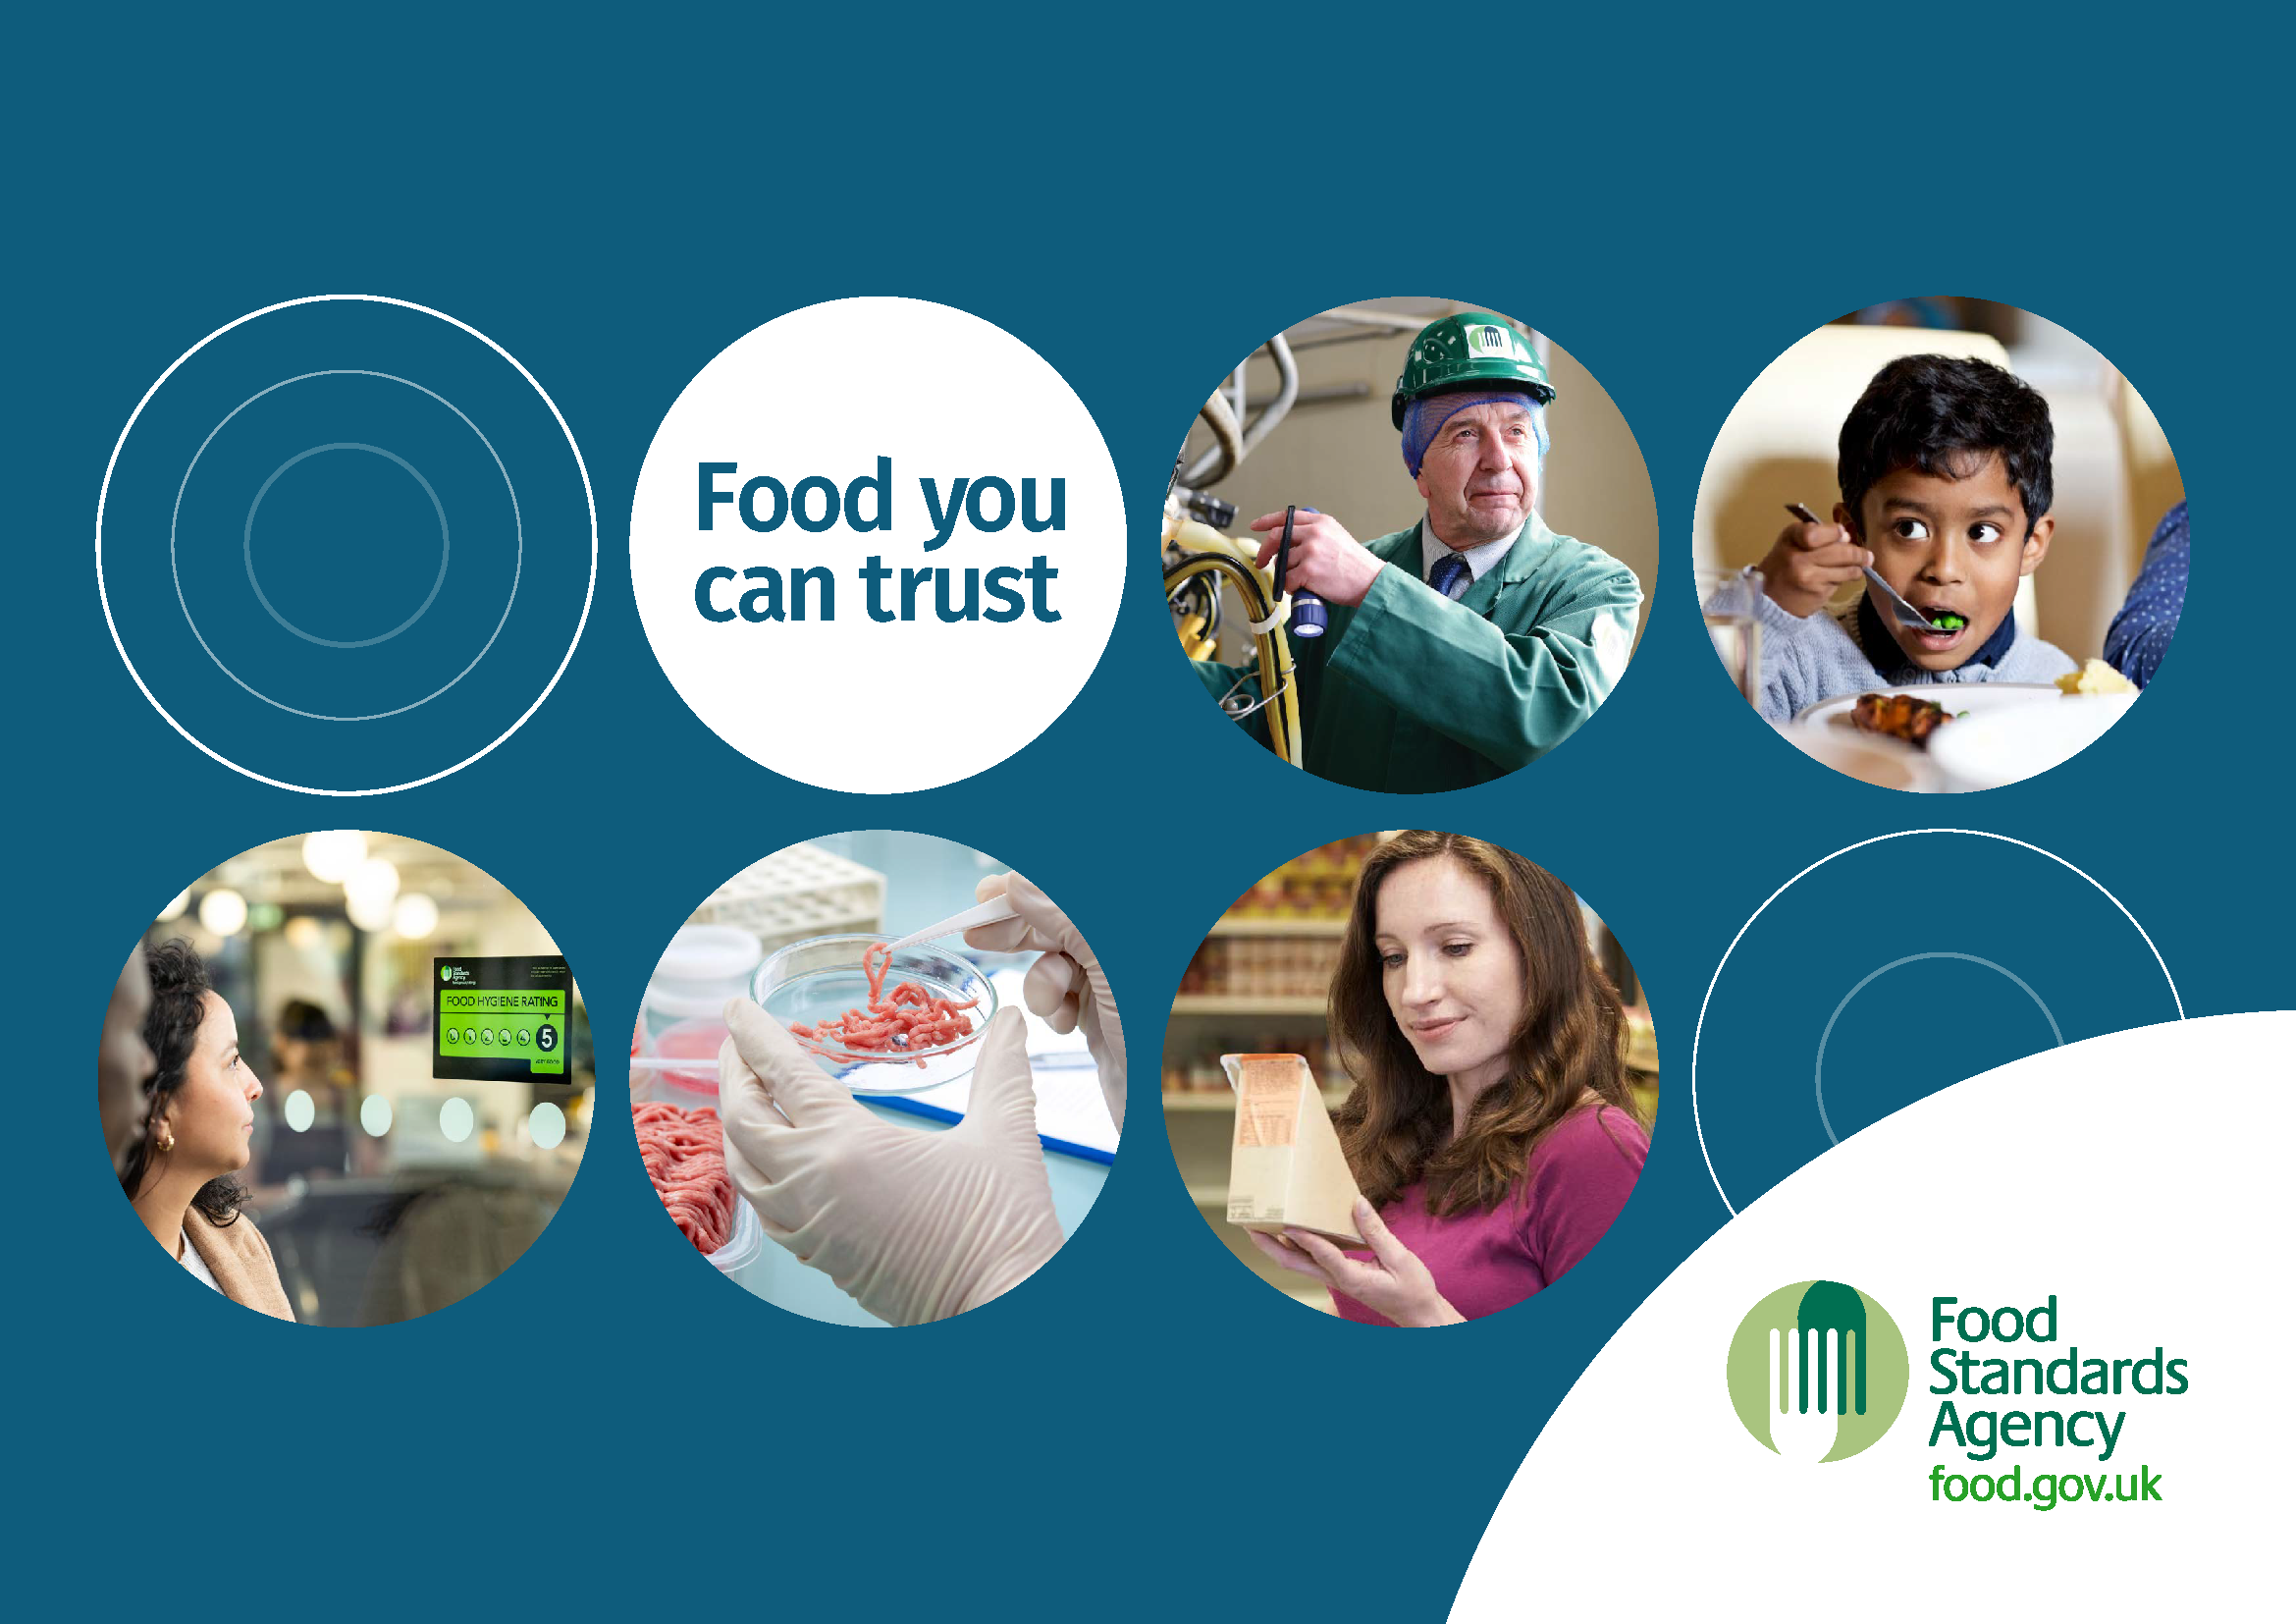 Front cover of the FSA Brochure - a group of people in circles with "Food you can trust' in one of them. Food Standards Agency logo in bottom right.